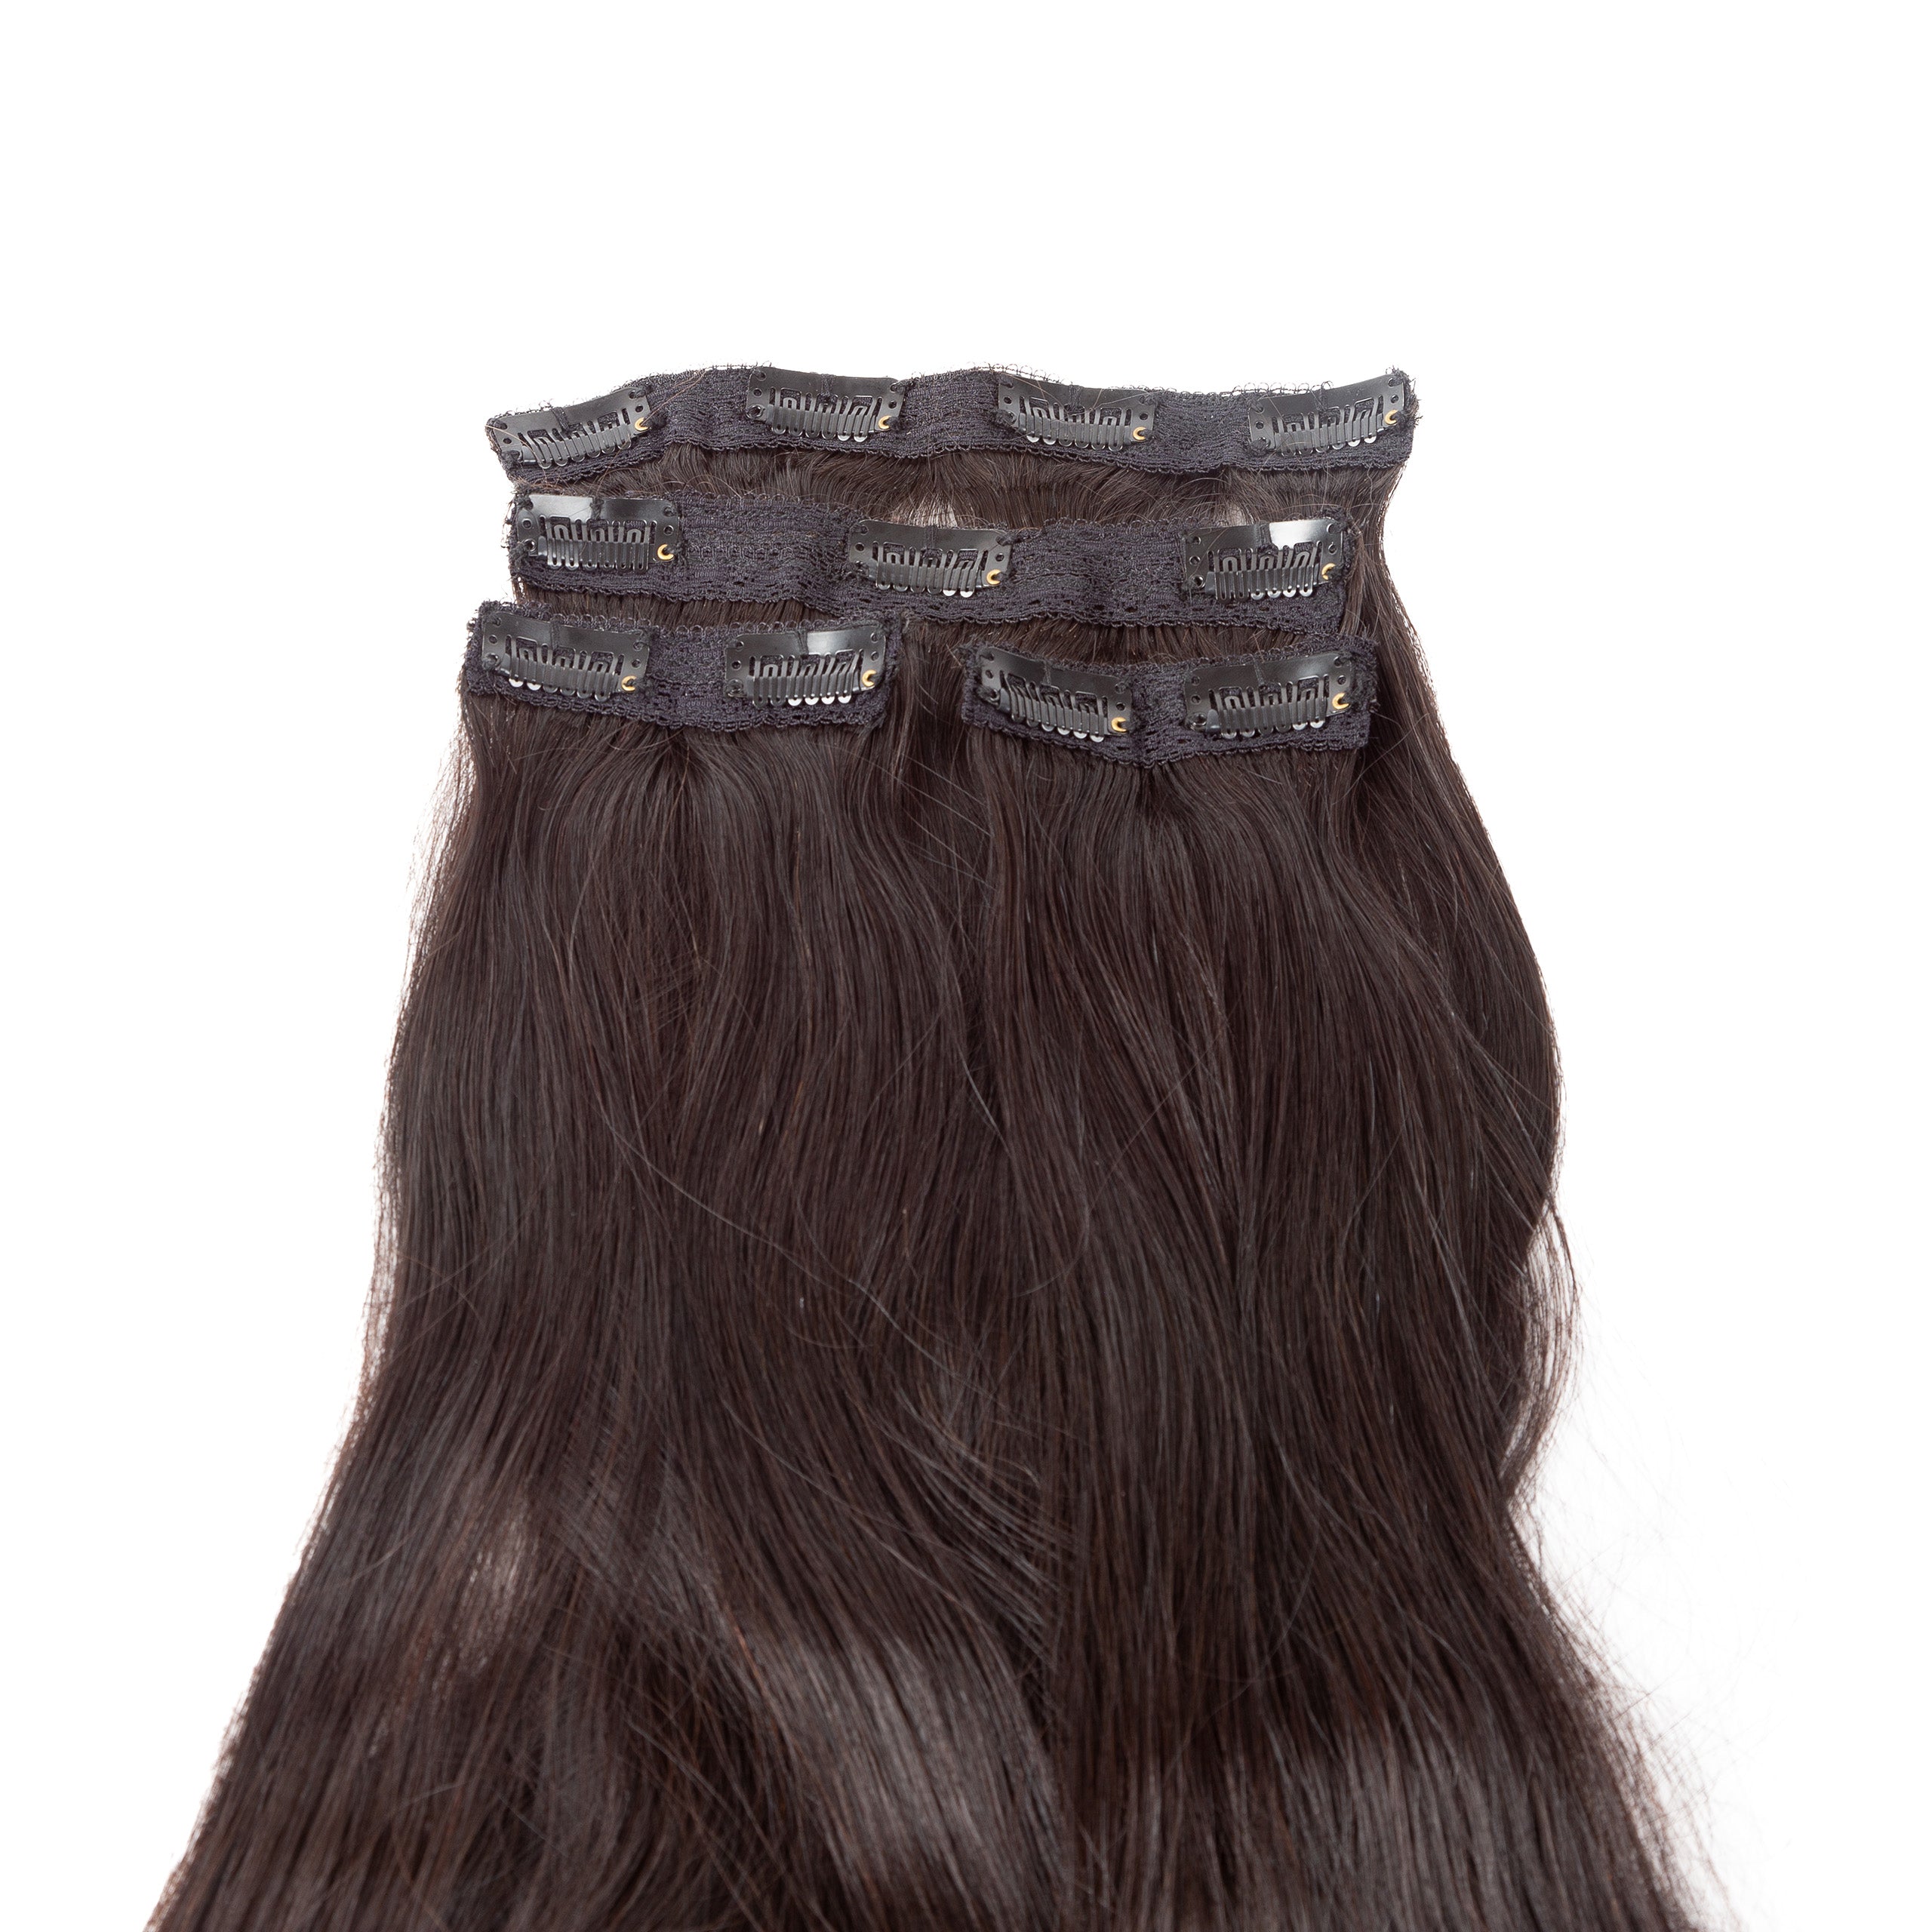 4 Pc Clip in Extensions